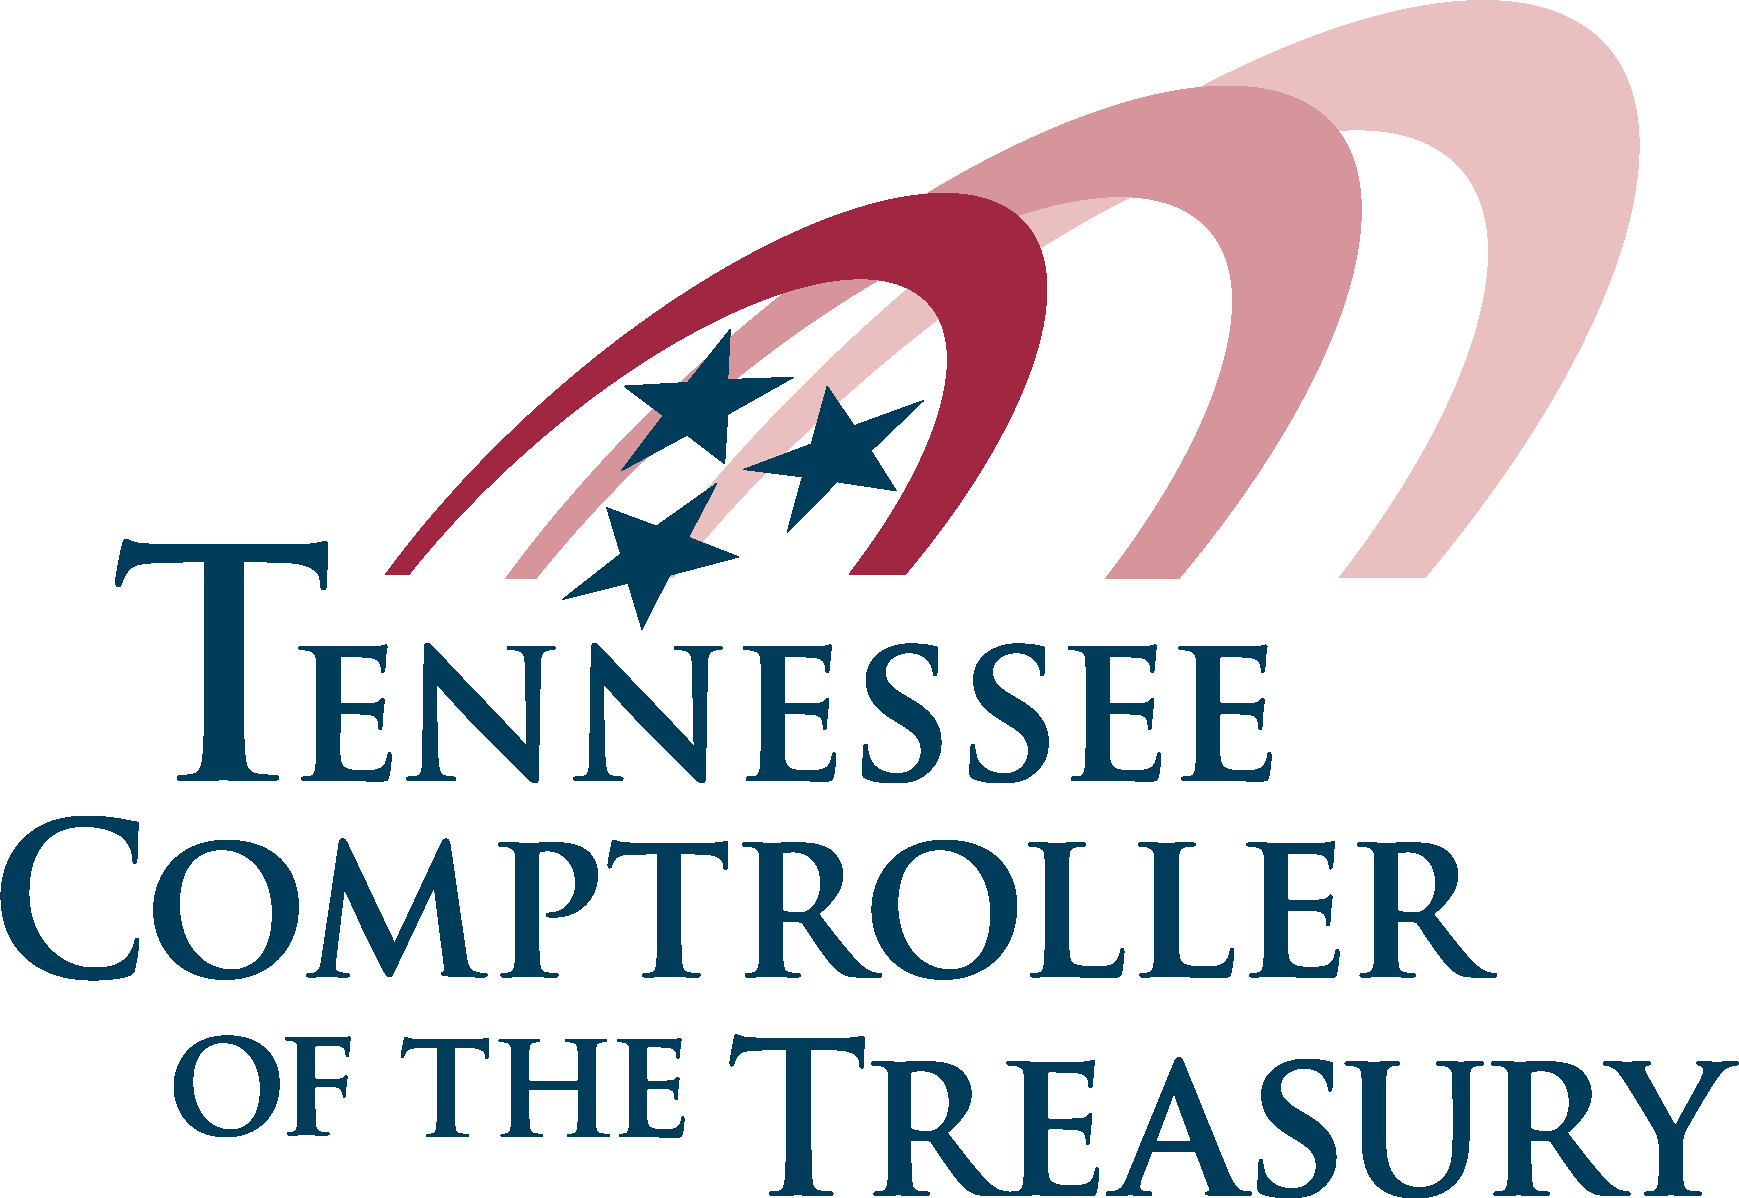 Tennessee Comptroller of the Treasury Company Logo